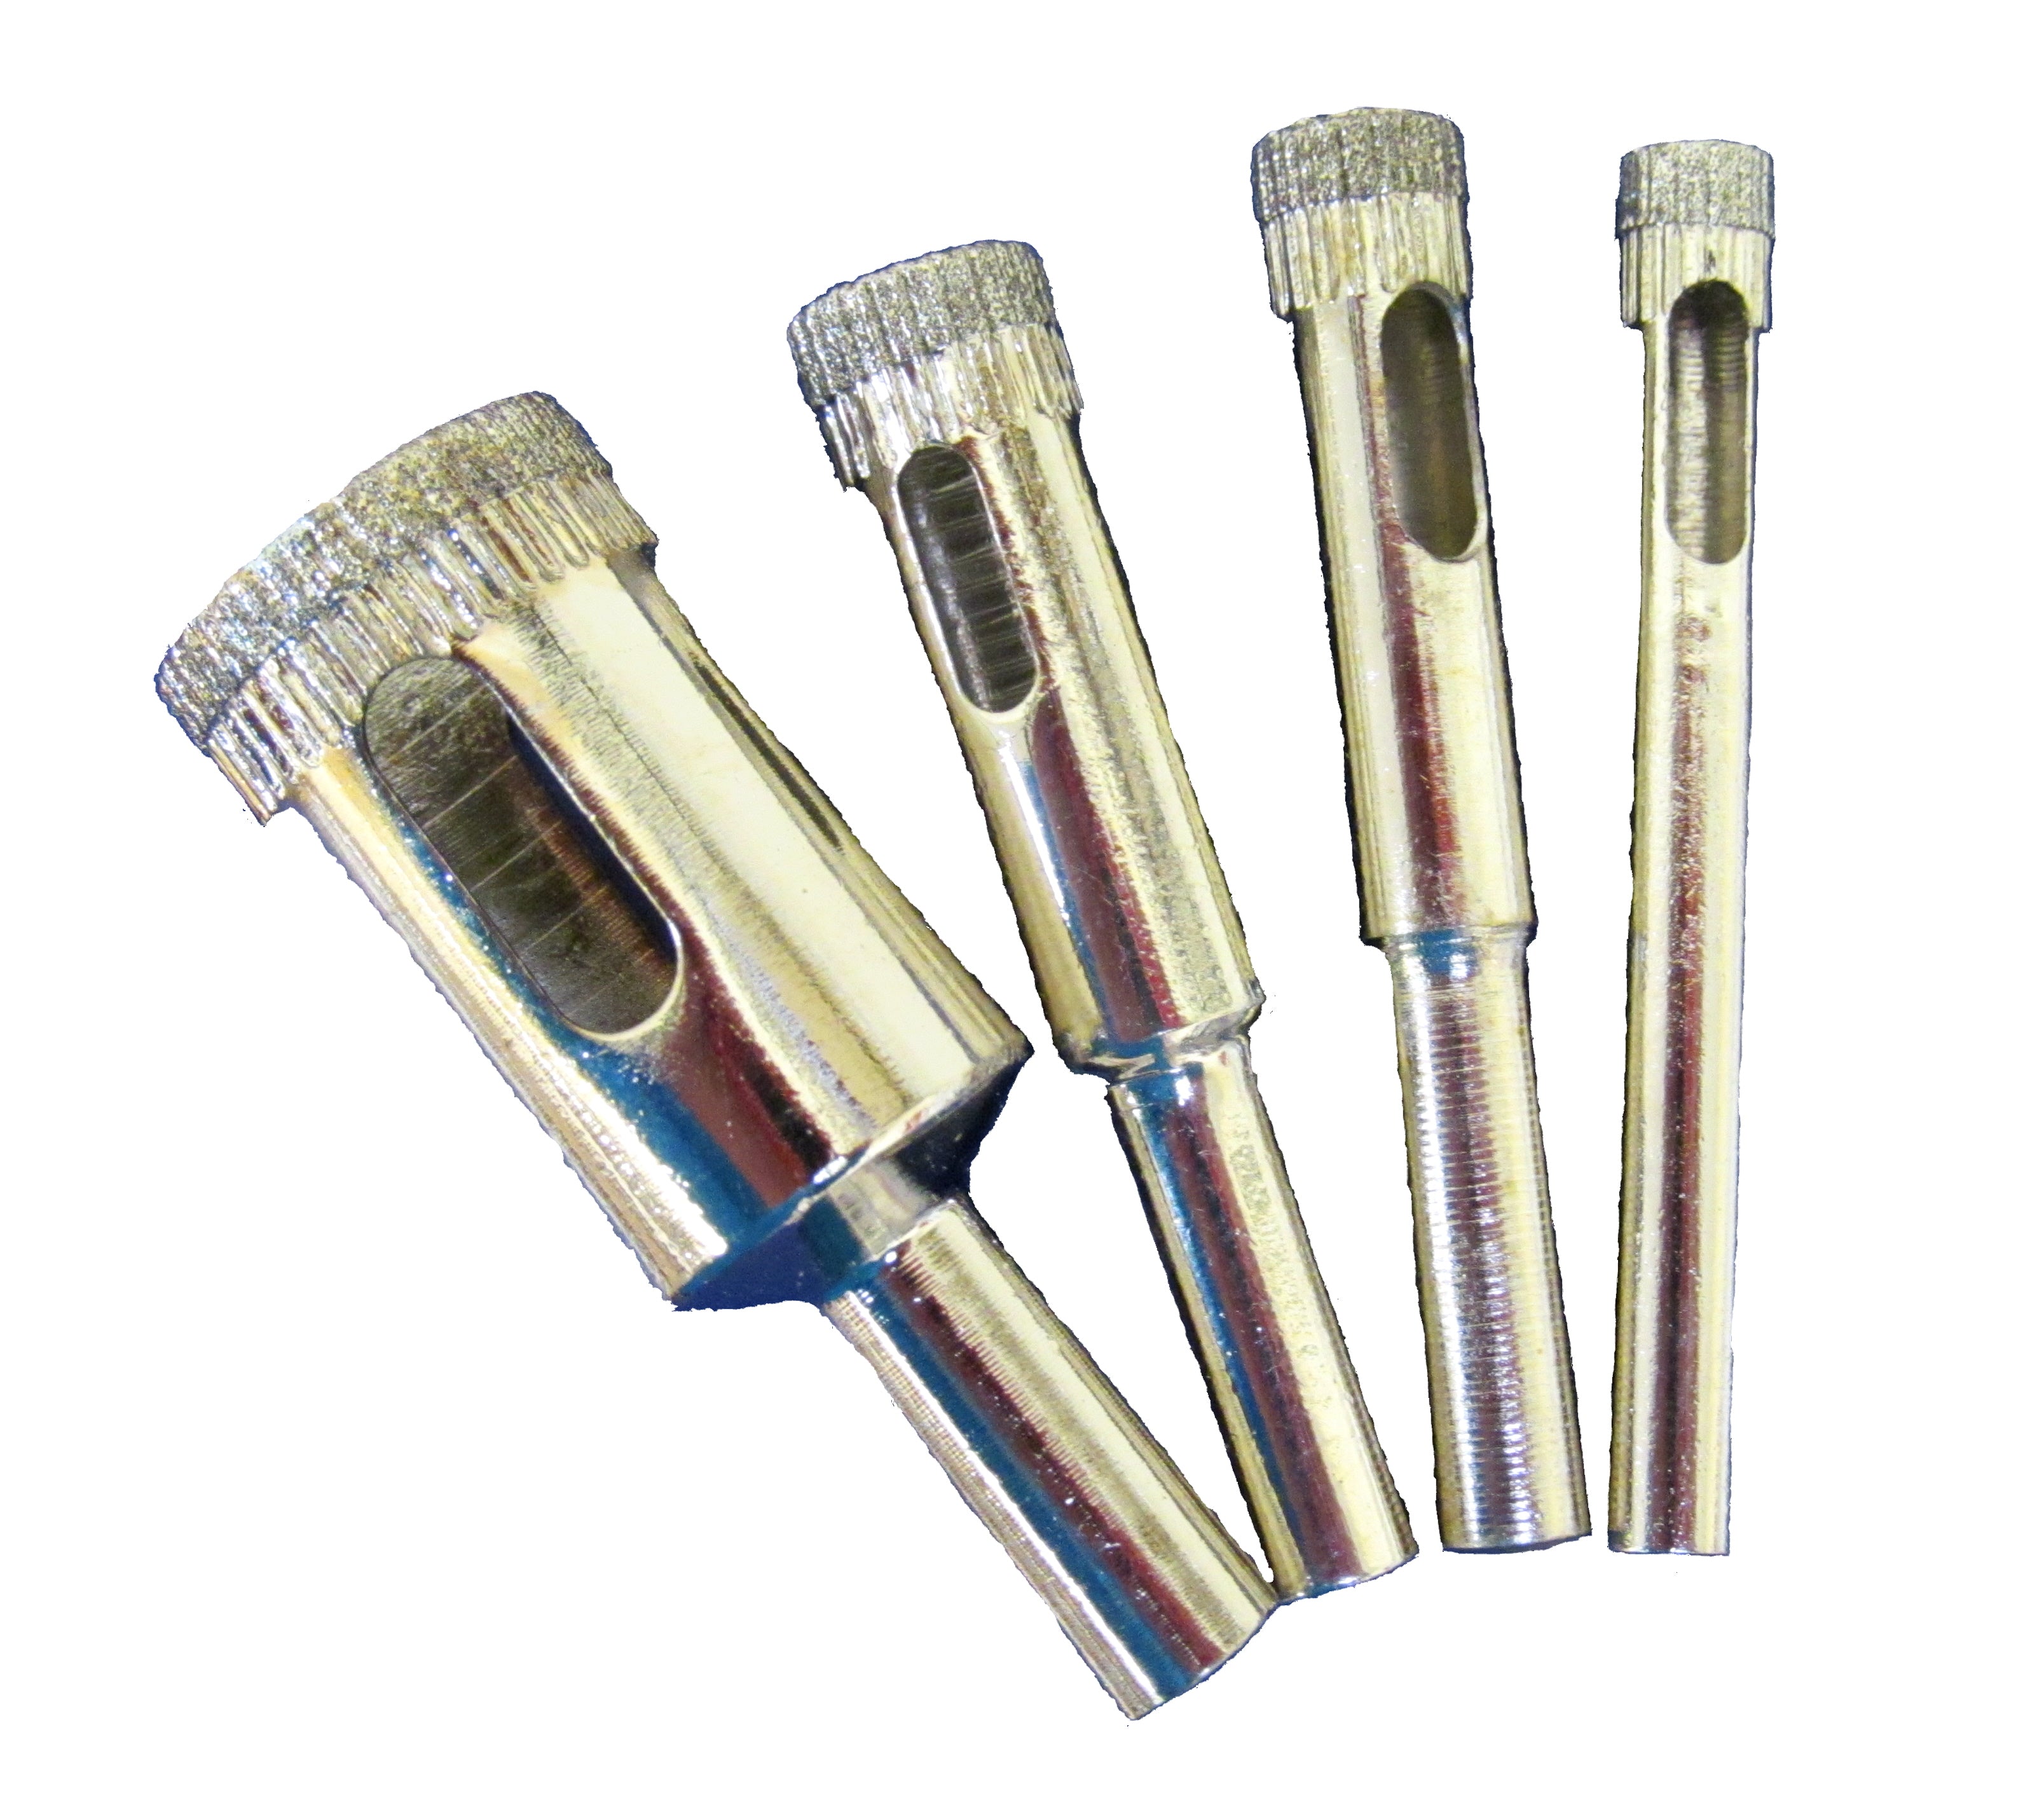 Ceramic and Glass Tile Drill Bits